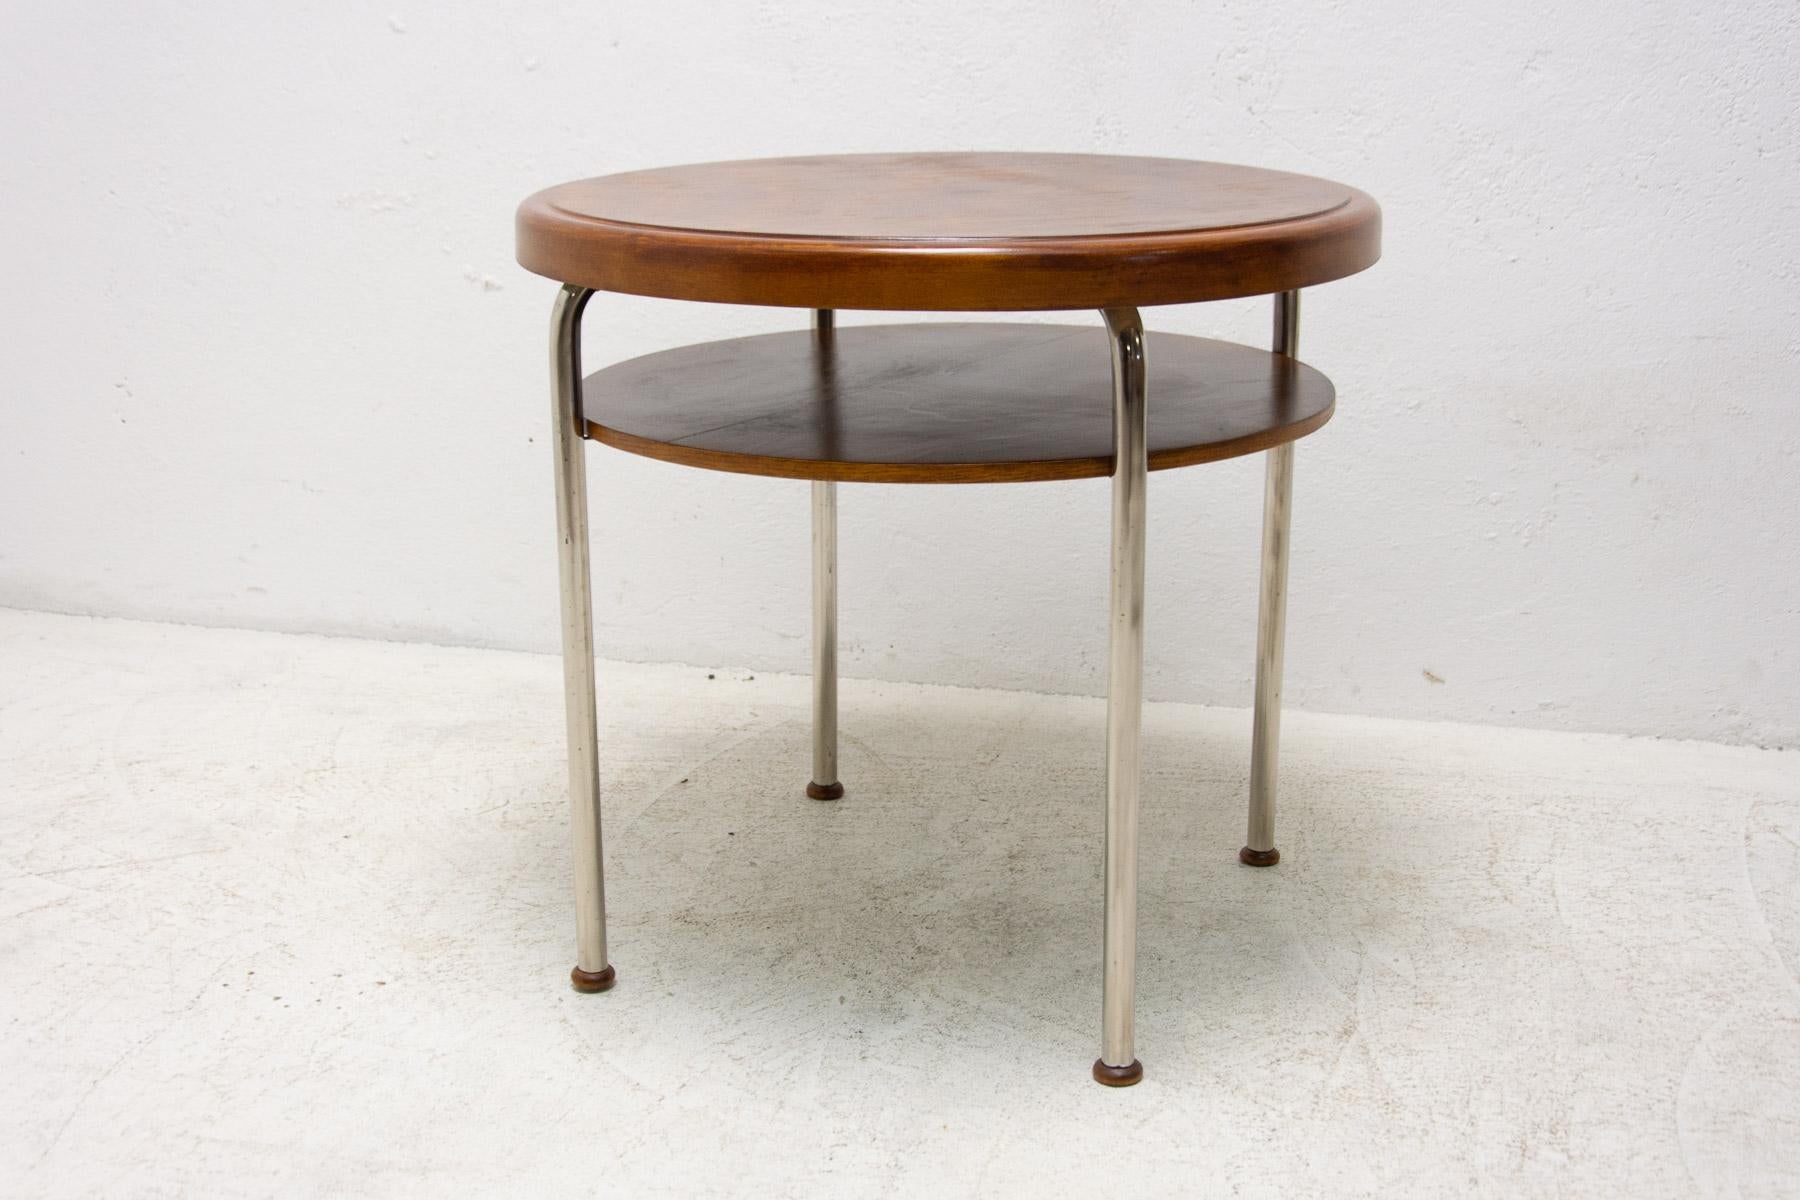 This coffee table was designed by Robert Slezák and made in the former Czechoslovakia in the 1930´s.

The table has a chrome-plated metal base and walnut wood tops. Chrome structure is in very good Vintage condition. The wood was fully